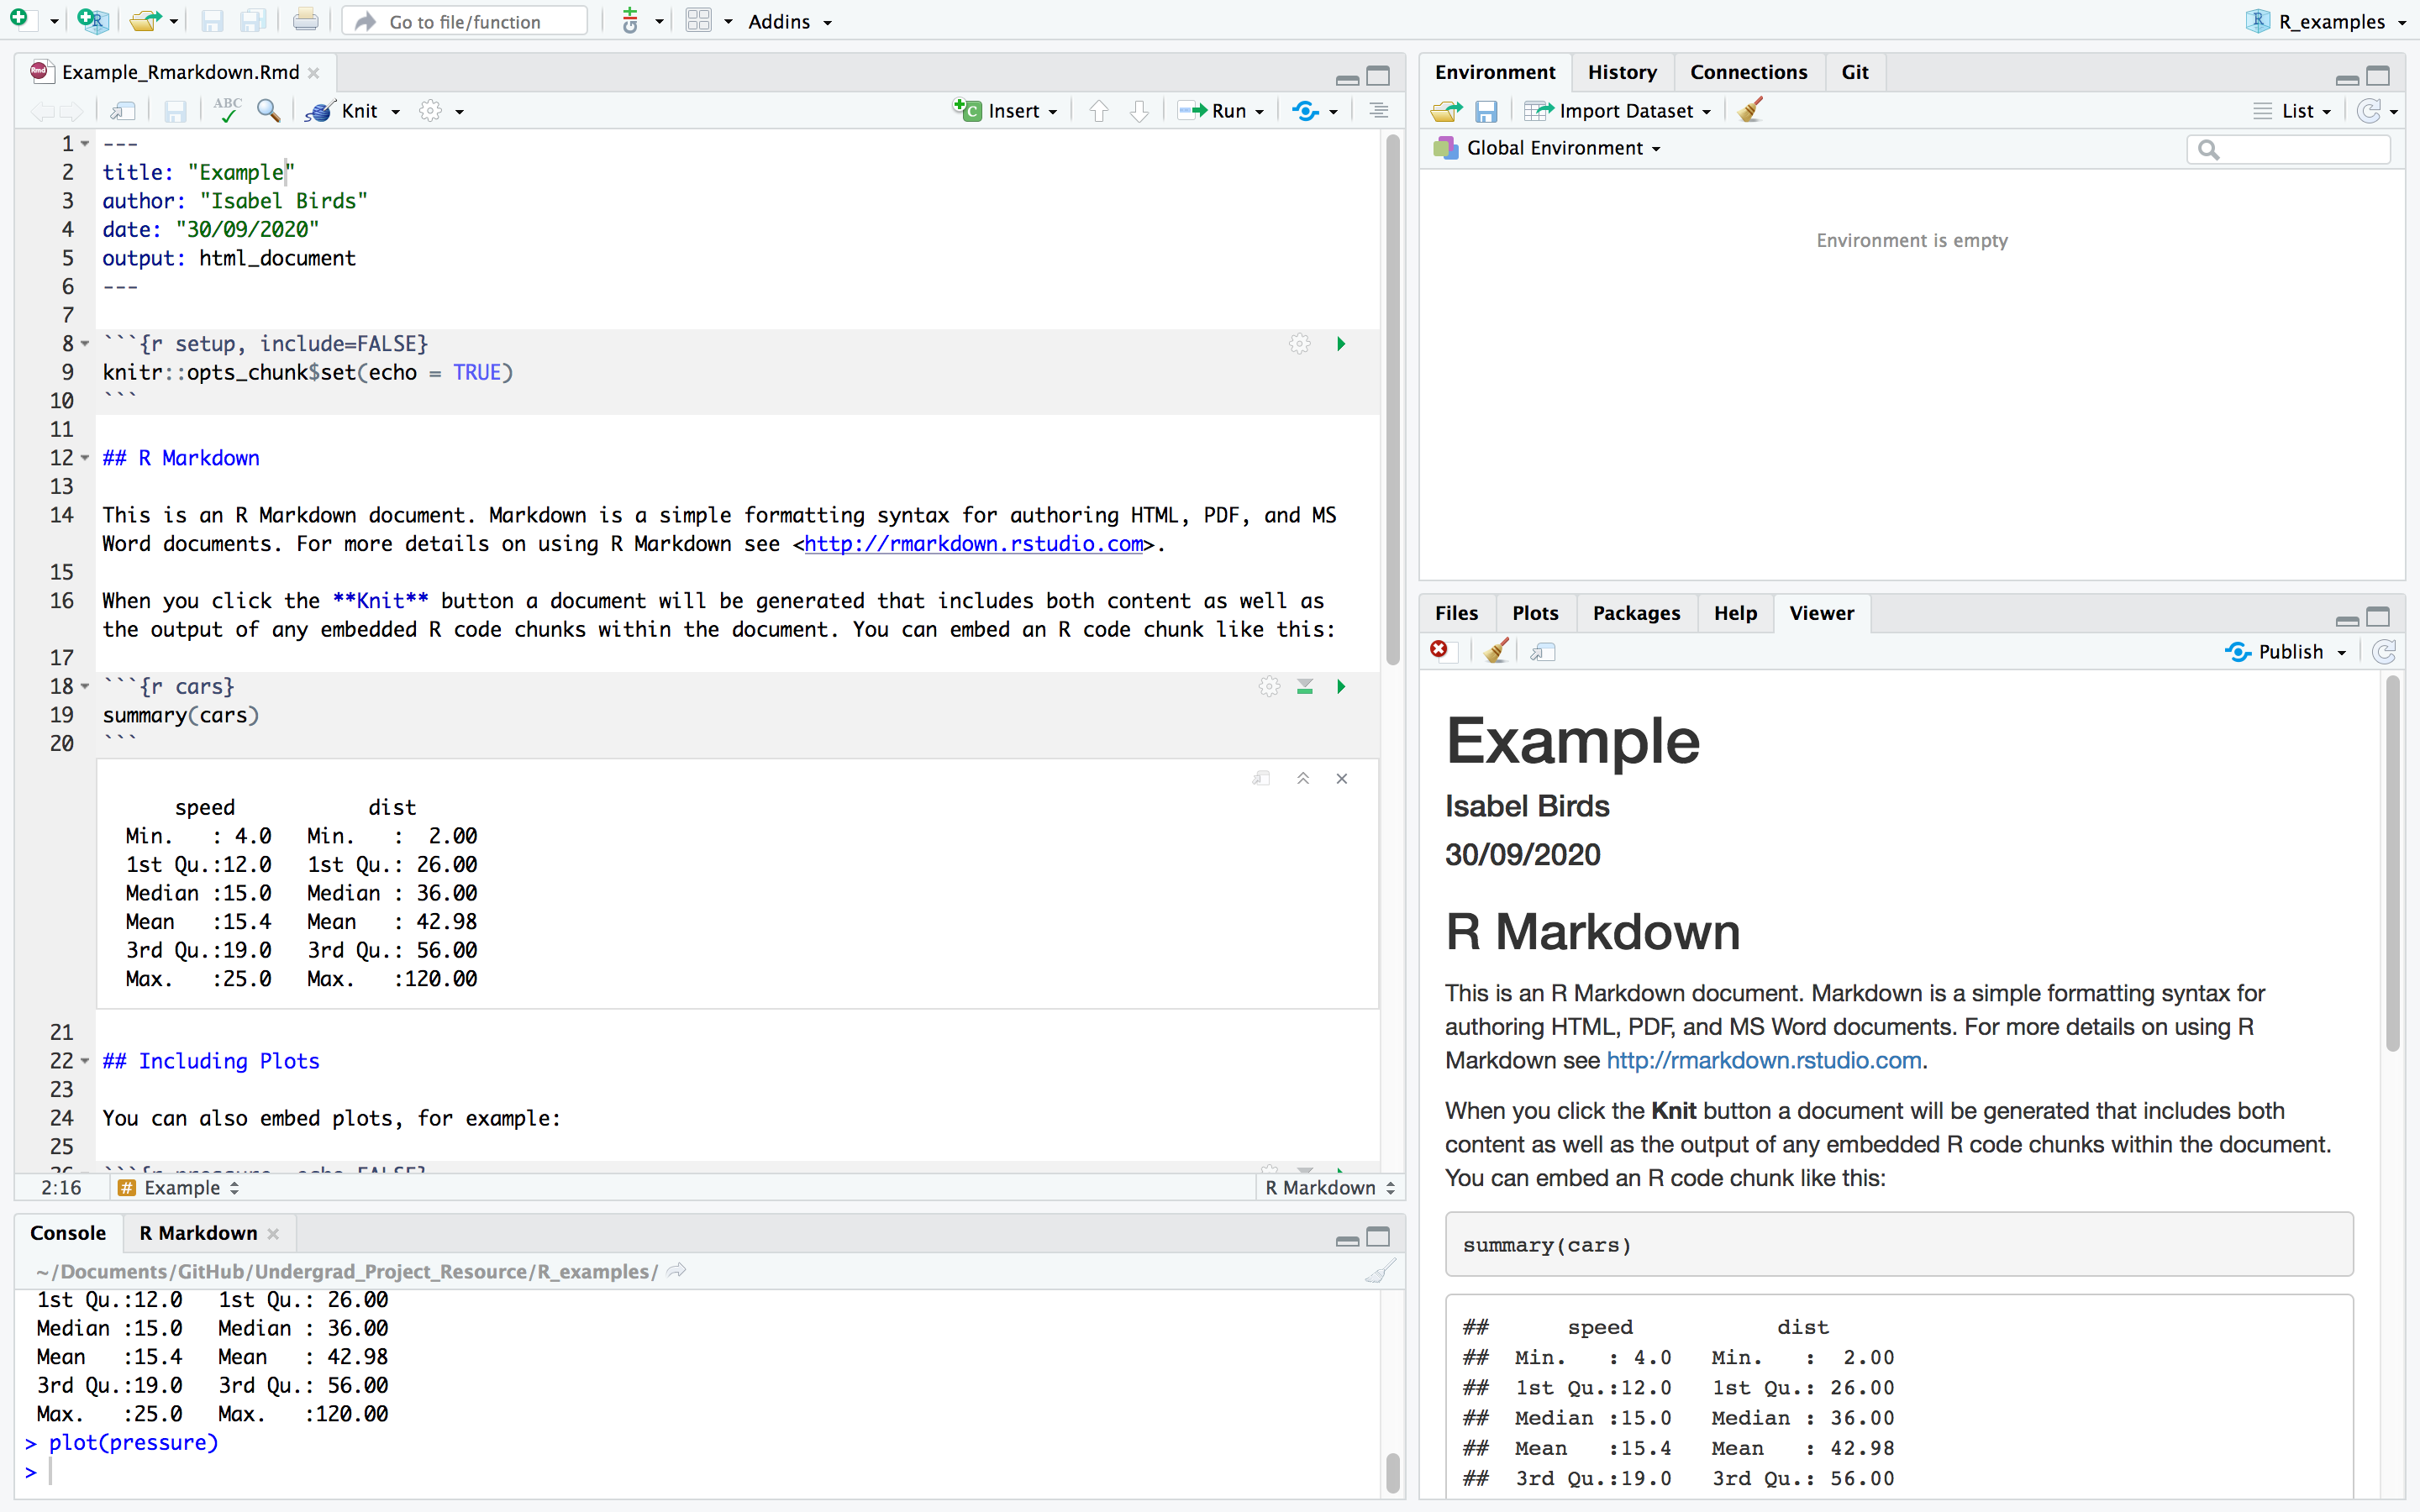 A screenshot of Rstudio, showing an example Rmarkdown document.